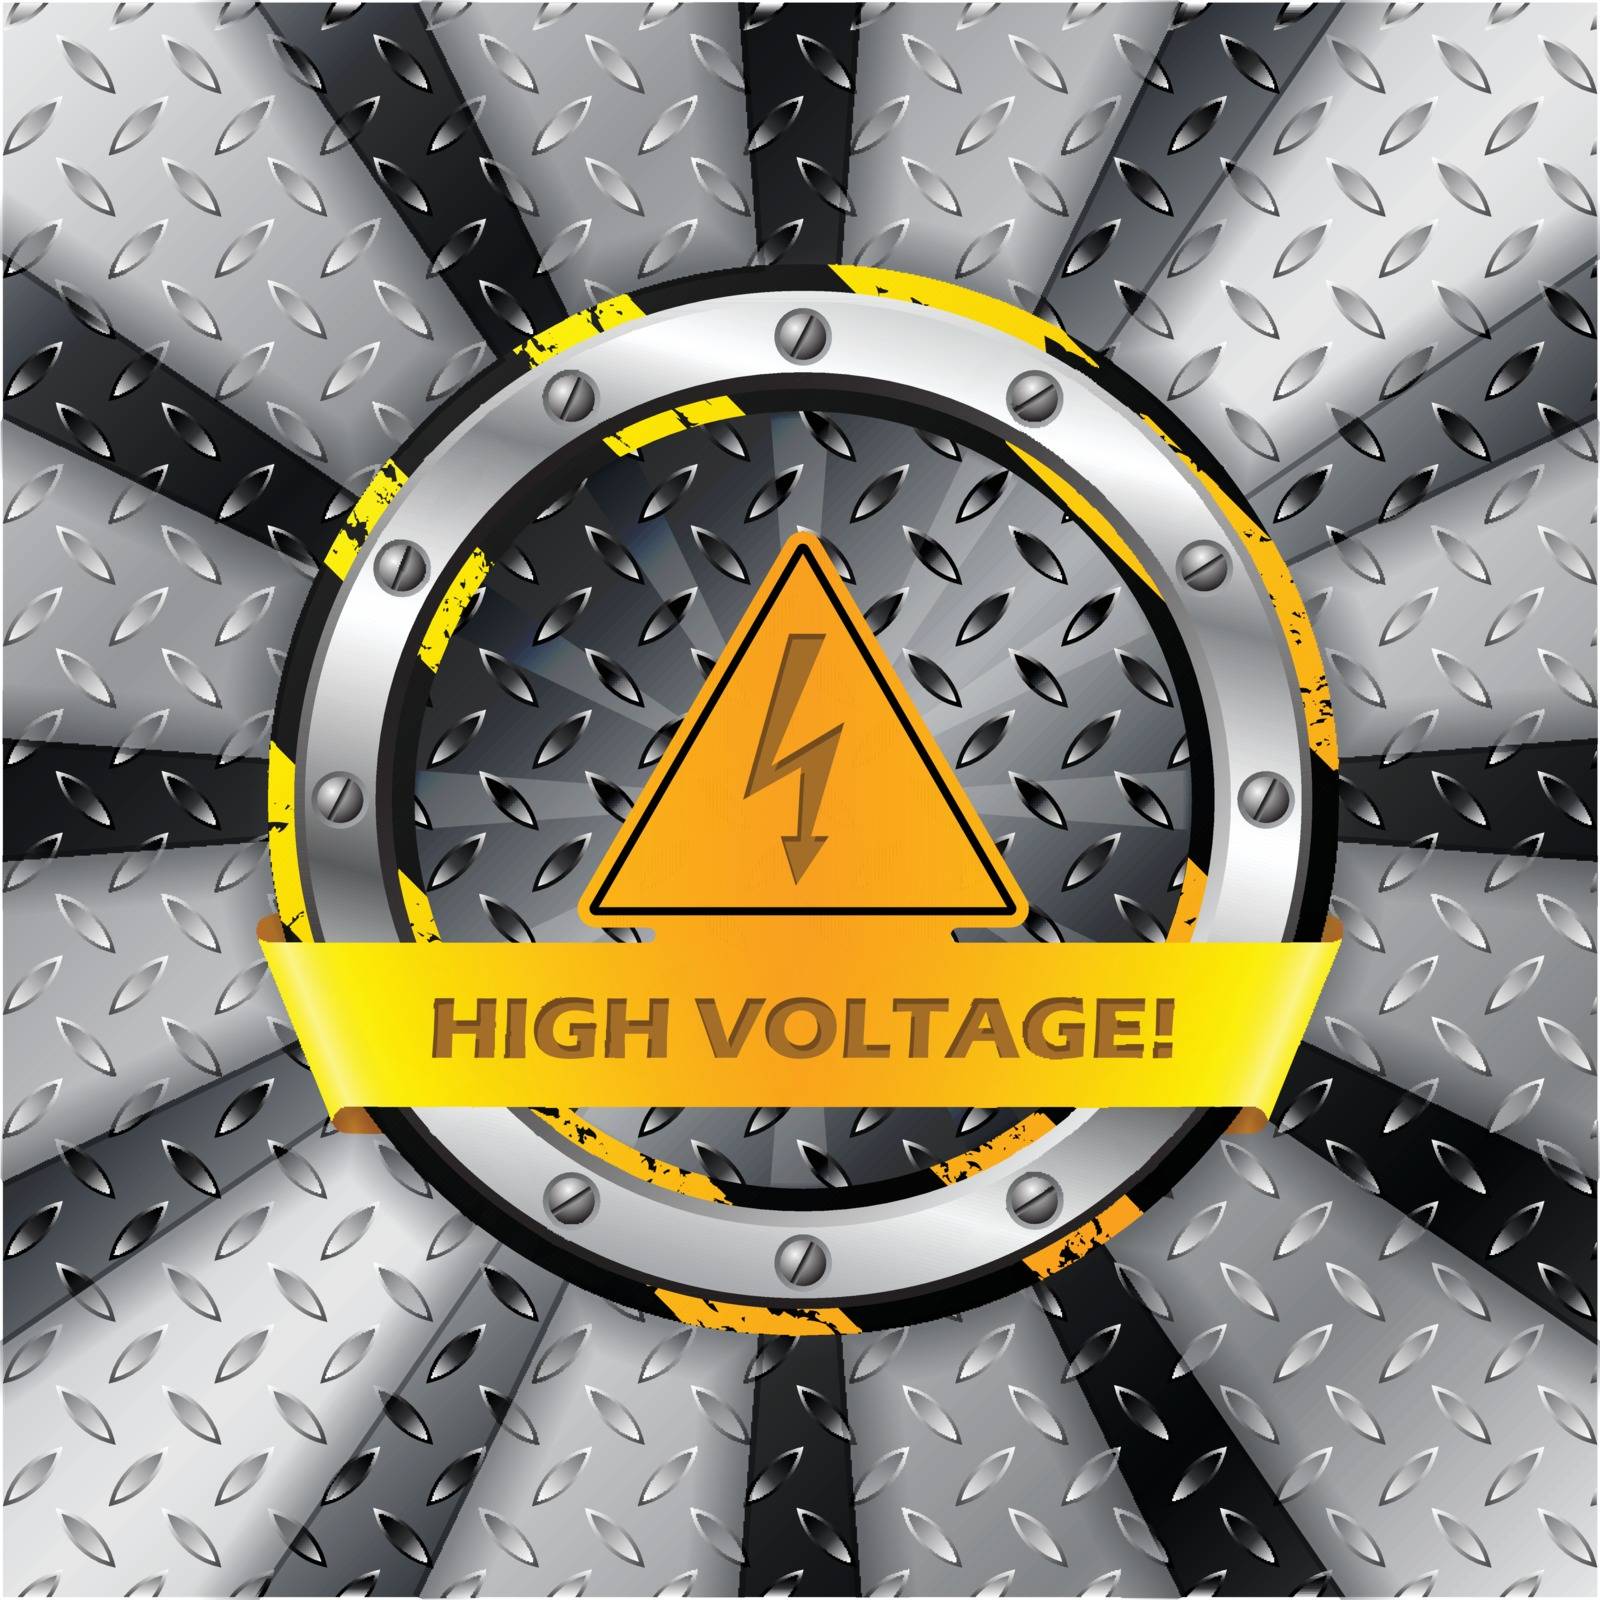 High voltage warning sign on metallic plate background